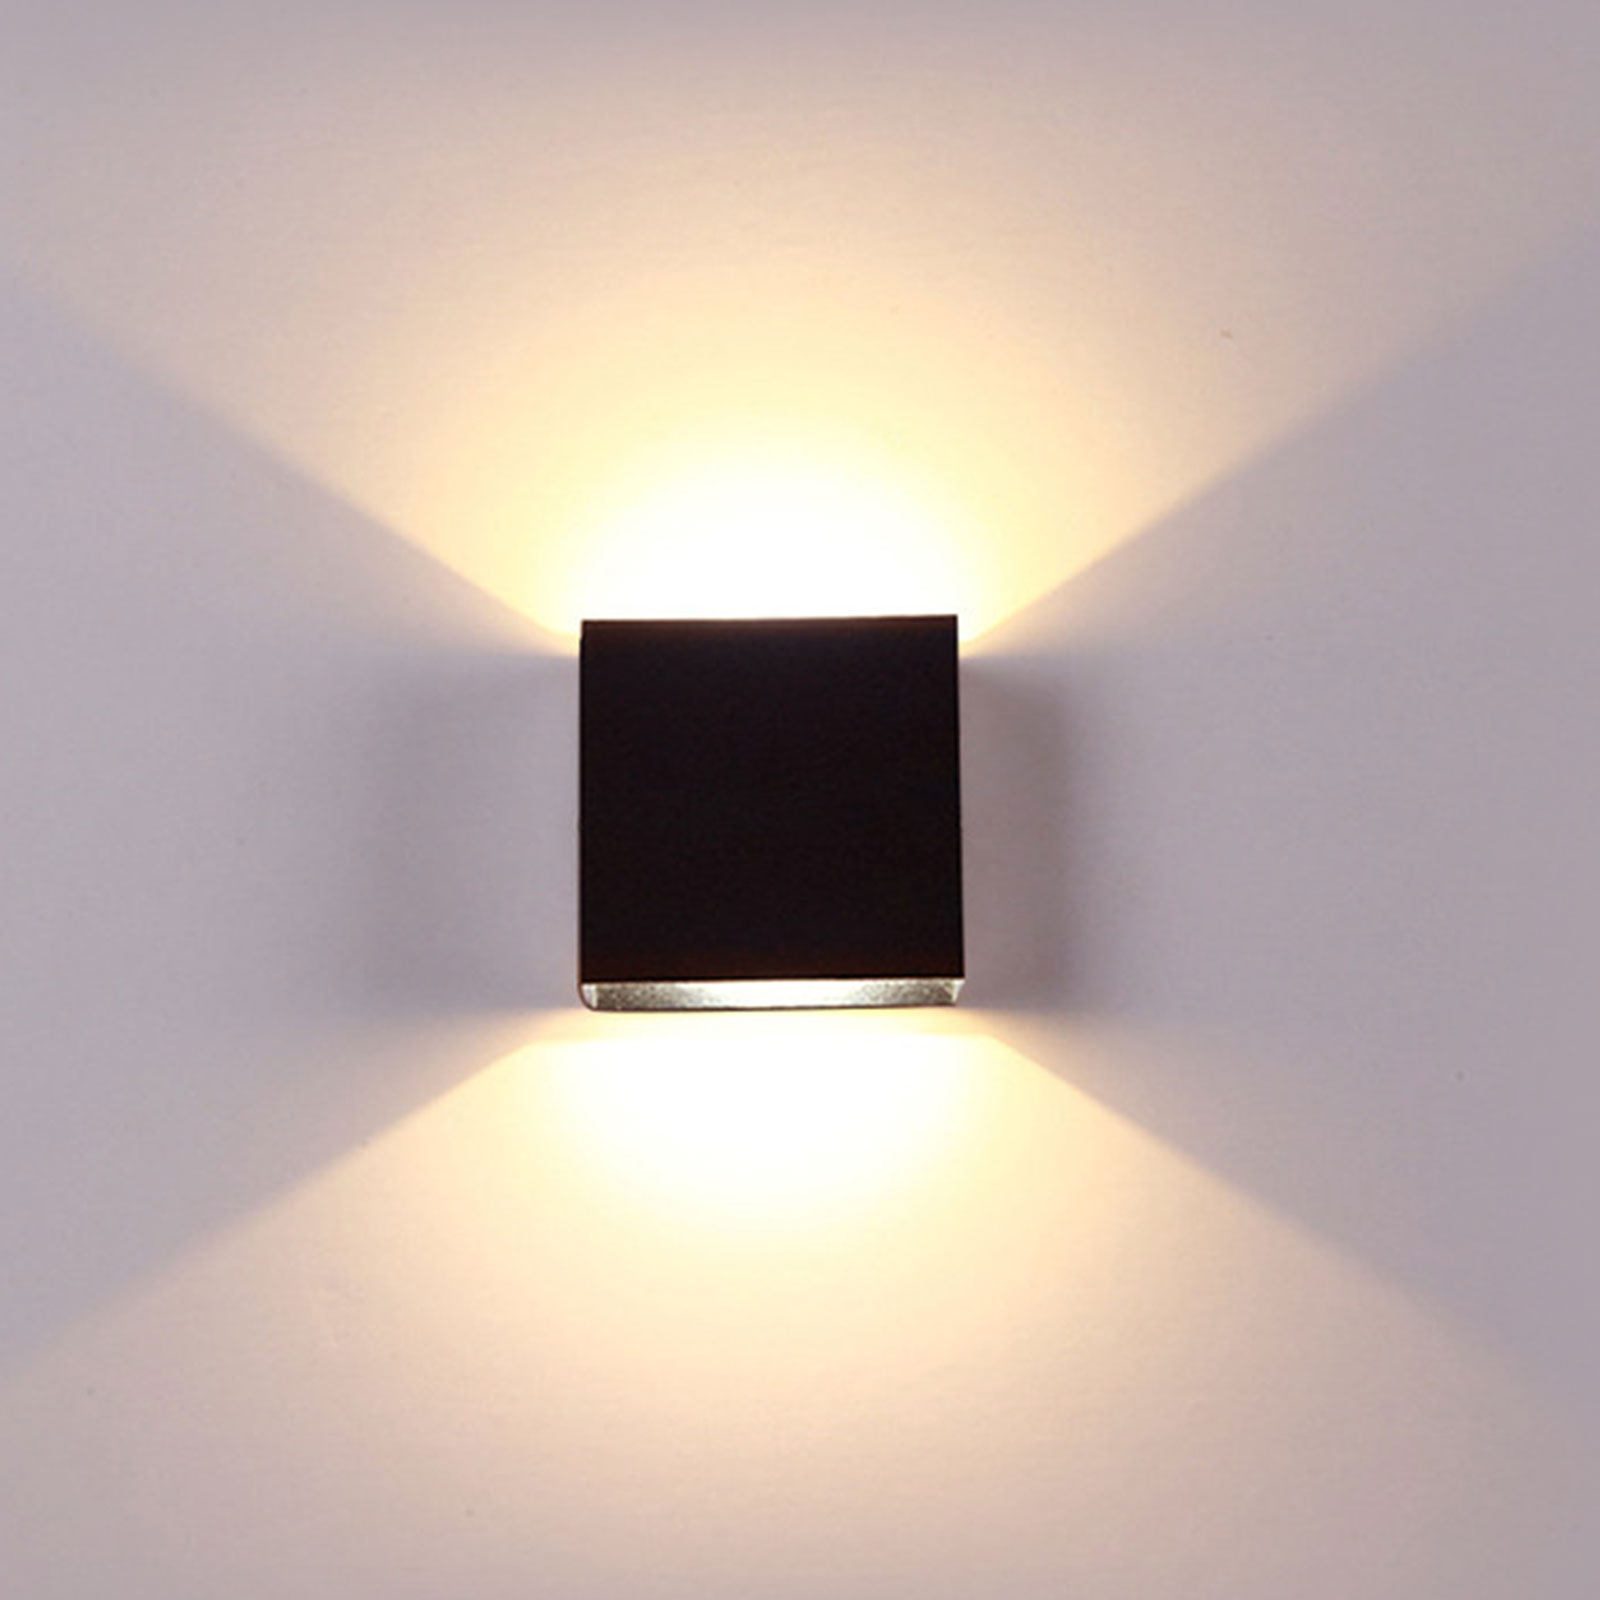 Cube LED Wall Lights Modern Up Down Sconce Lighting Fixture Lamp Indoor/Outdoor 